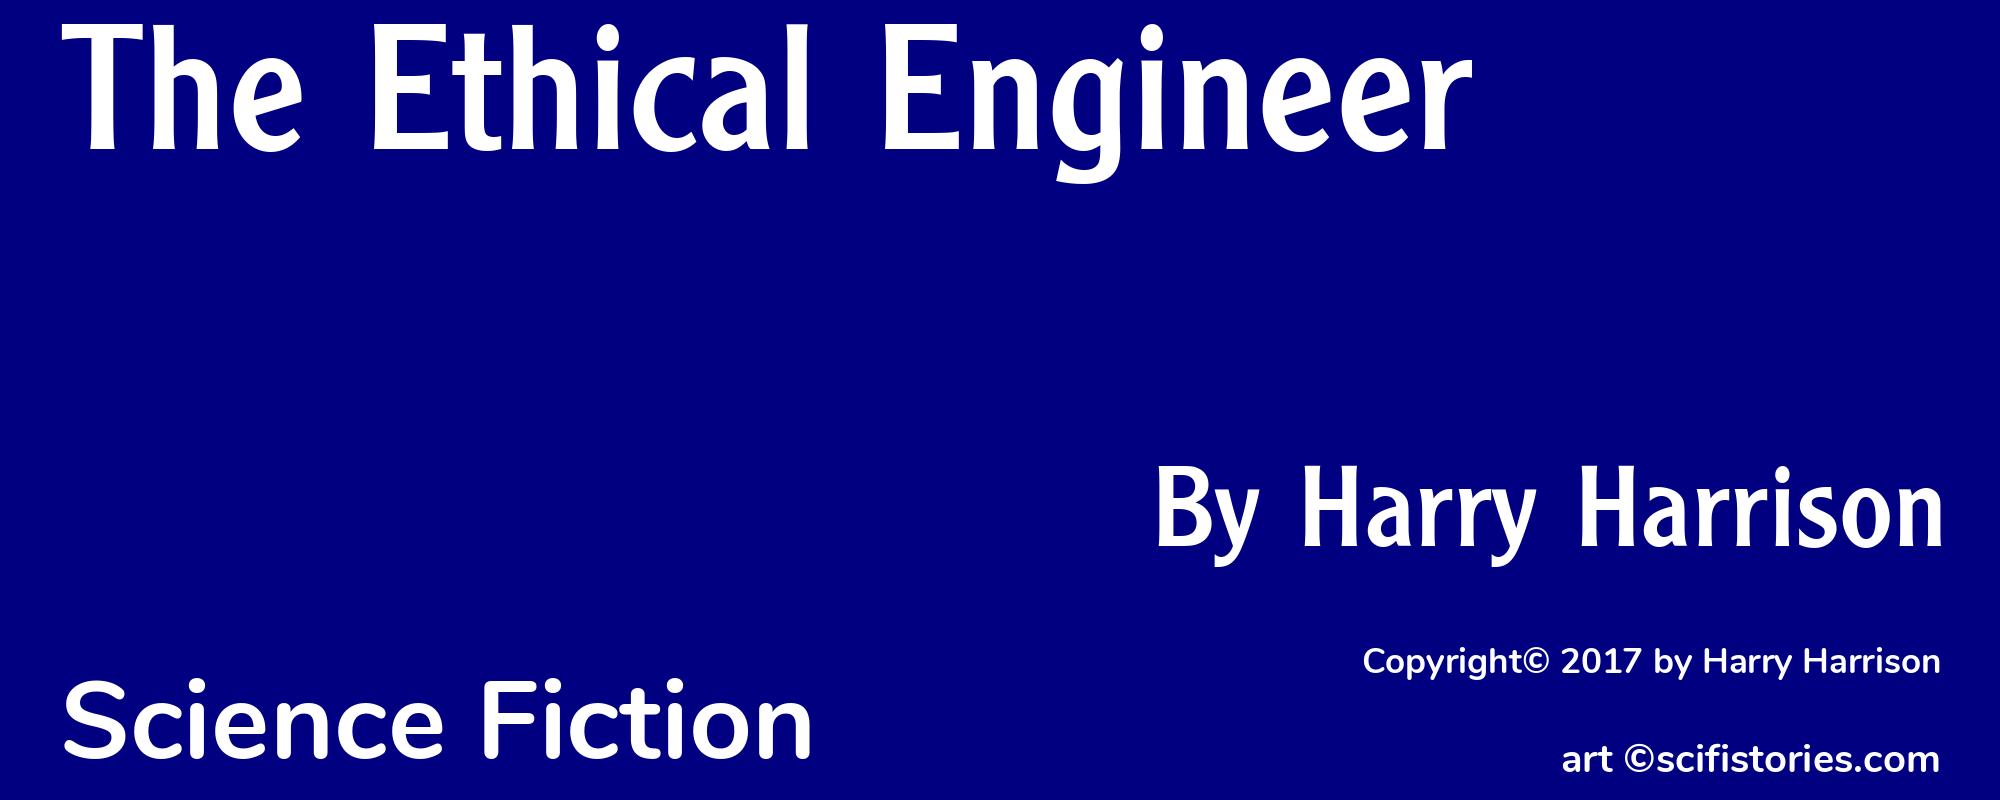 The Ethical Engineer - Cover